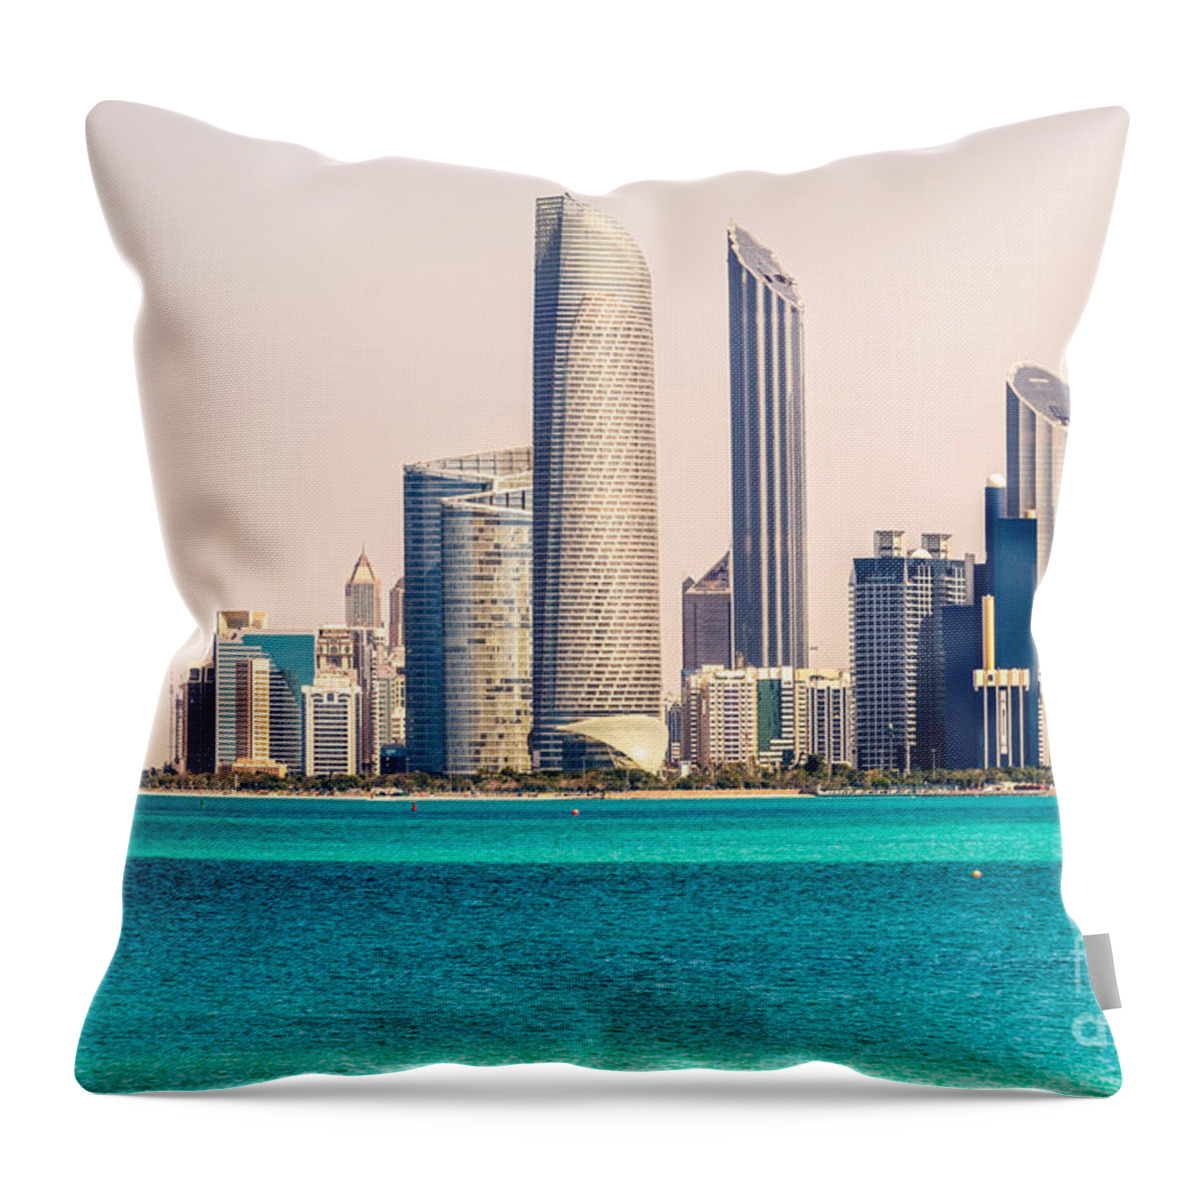 Emirates Throw Pillow featuring the photograph Abu Dhabi Skyline - United Arab Emirates by Luciano Mortula